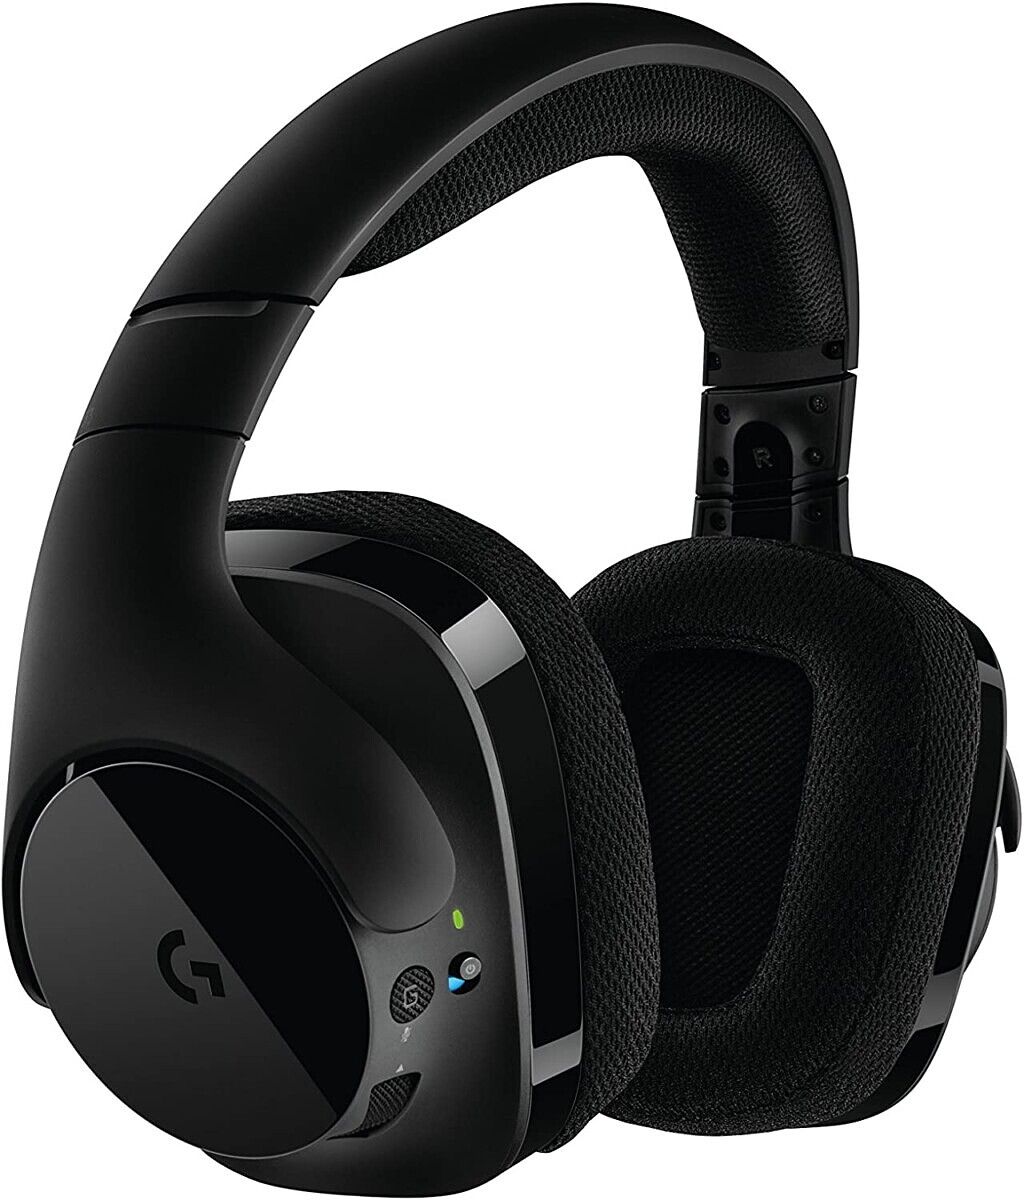 Get a wireless headset that'll last for cheap, thanks to Walmart's Big Save event. With comfortable cups and a long battery life, the G533s will not interrupt long gaming sessions.